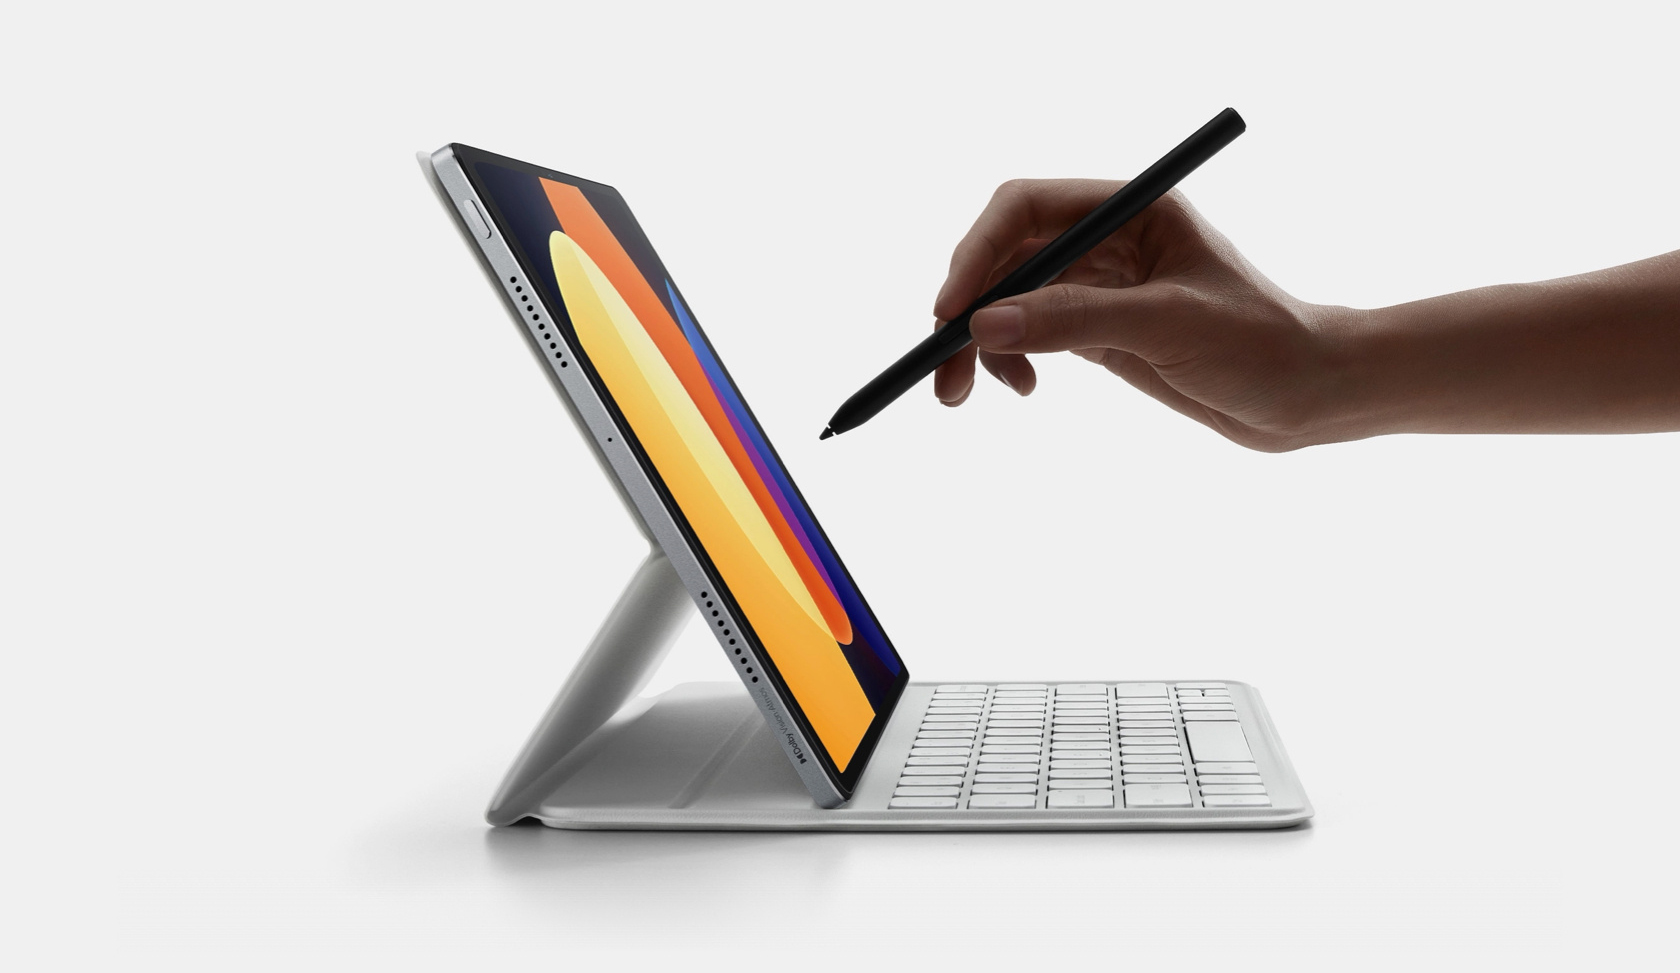 xiaomi-pad-5-pro-12-4-larger-premium-tablet-arrives-with-superior-battery-capacity-a-new-display-and-miui-pad-13